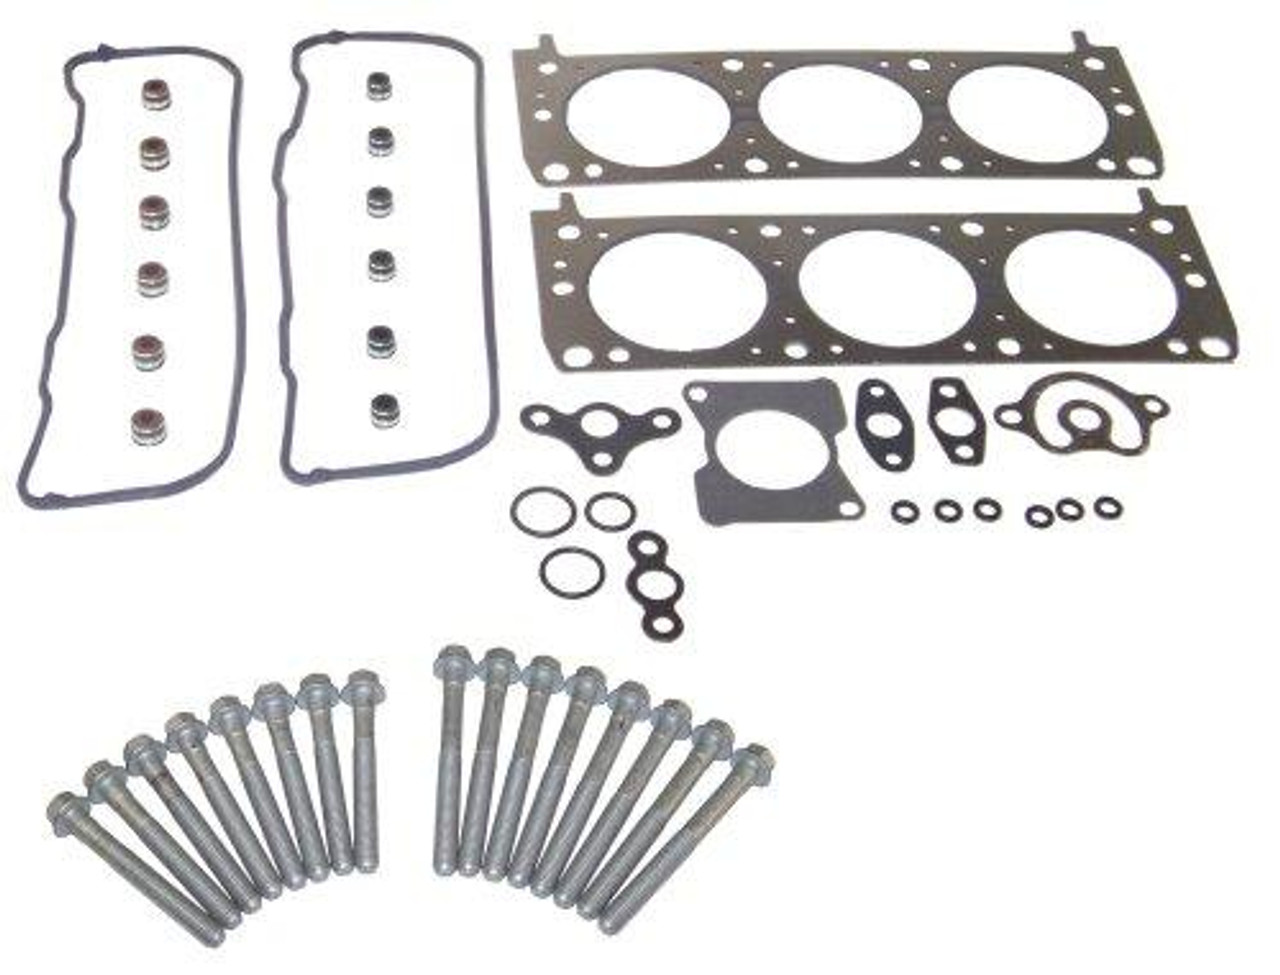 Head Gasket Set with Head Bolt Kit - 1987 Buick Century 2.8L Engine Parts # HGB31301ZE1